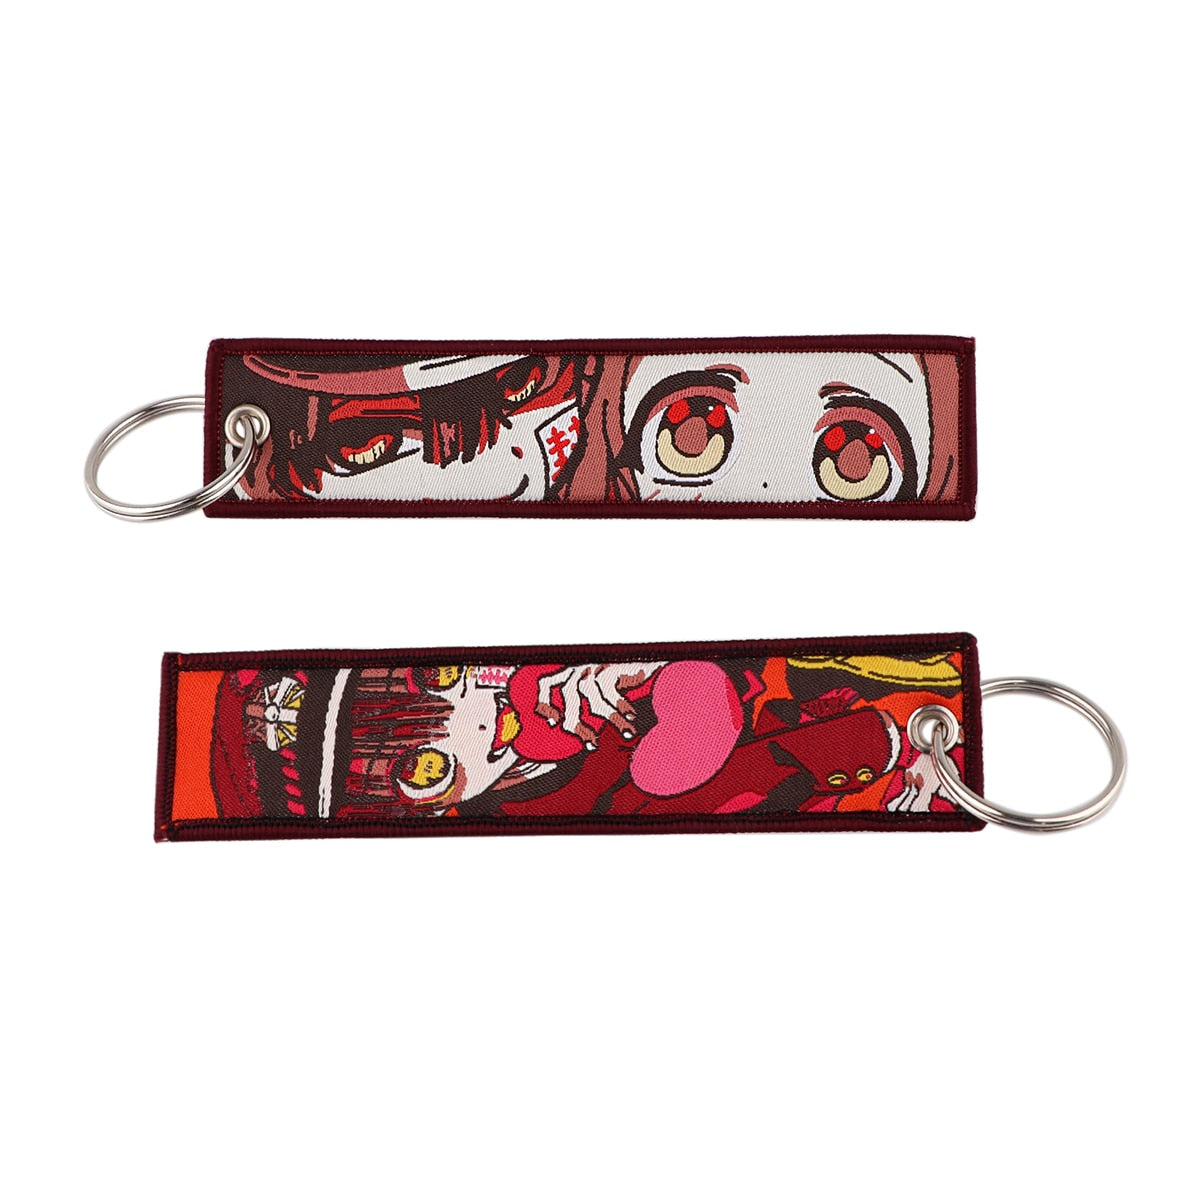 Anime Embroidery Keychain Key Ring 42